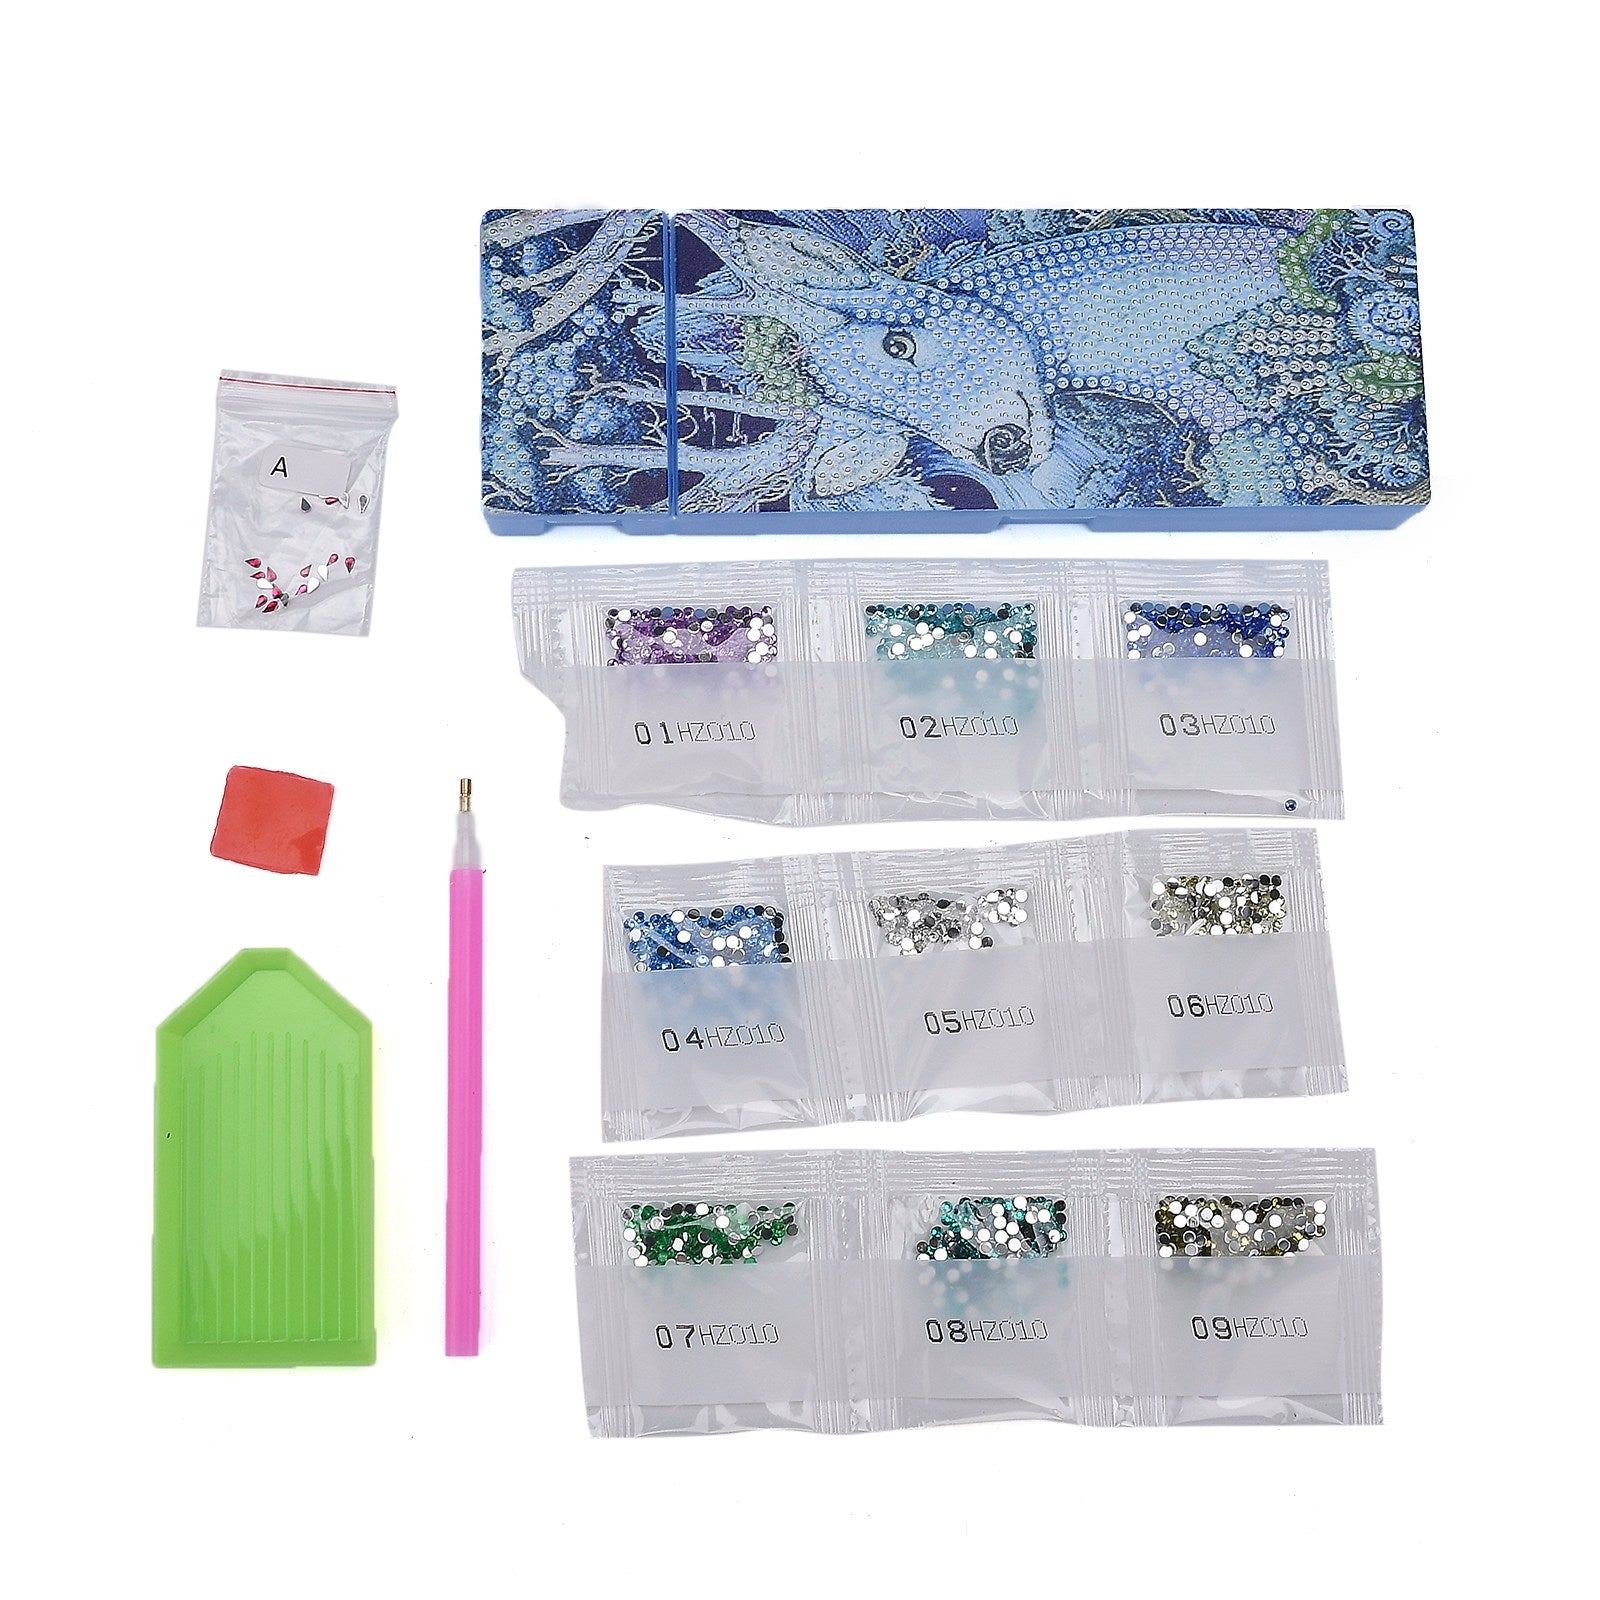 Globleland 5D DIY Diamond Painting Stickers Kits For ABS Pencil Case Making, with Resin Rhinestones, Diamond Sticky Pen, Tray Plate and Glue Clay, Rectangle with Deer Pattern, Mixed Color, 20.5x7x2.5cm, 2Set/Pack